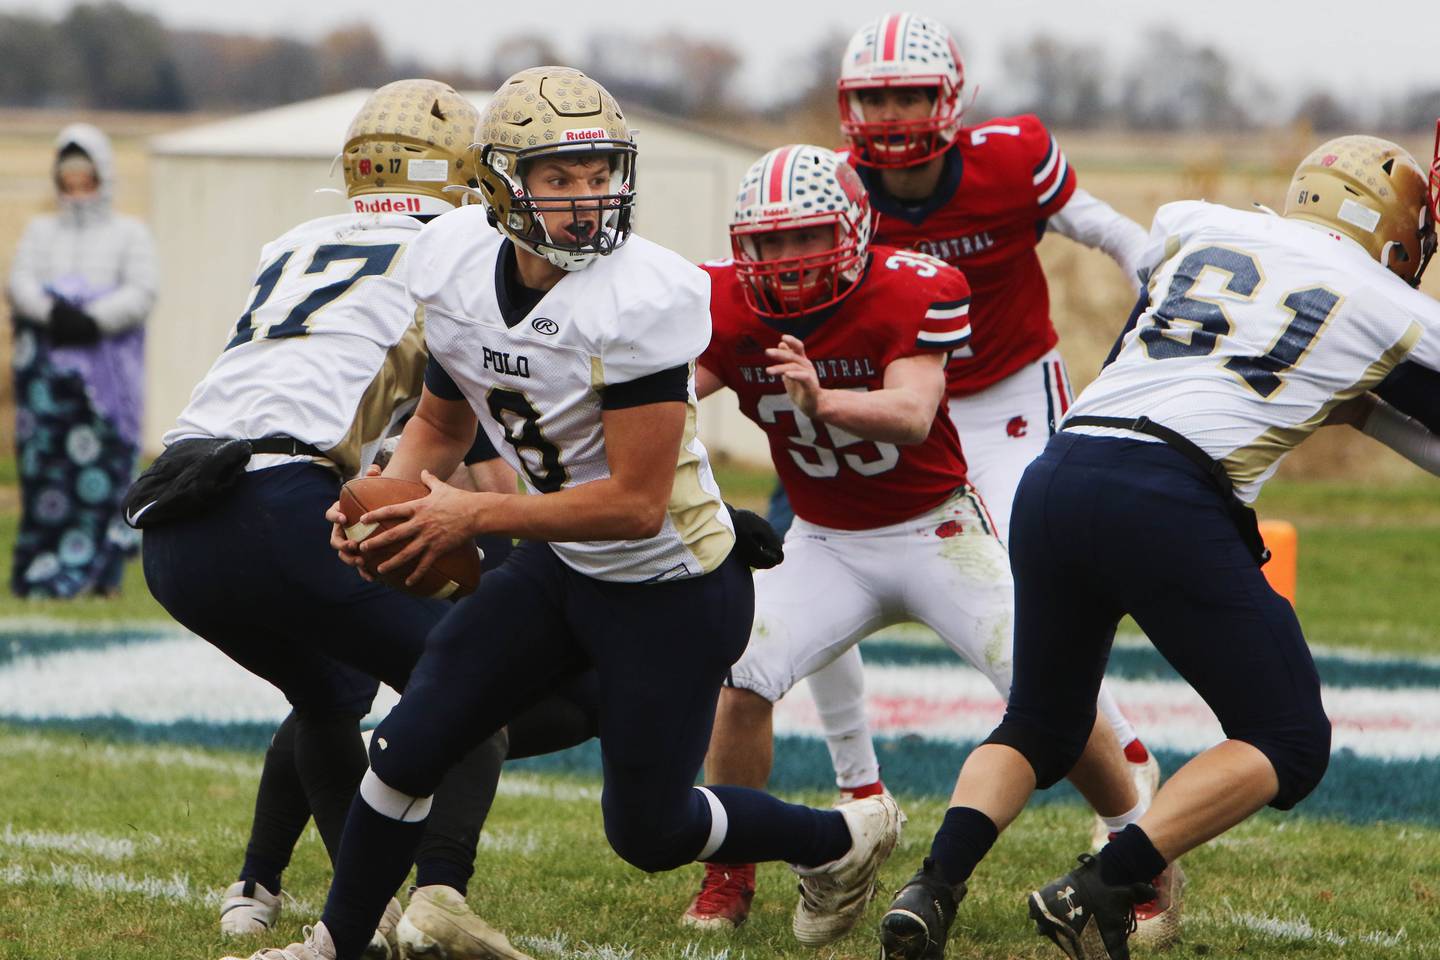 Polo quarterback Tyler Merdian (8) drops back to pass the ball during the first half of an Illinois 8-Man semifinal playoff game against West Central on Saturday, Nov. 13, 2021 in Biggsville.